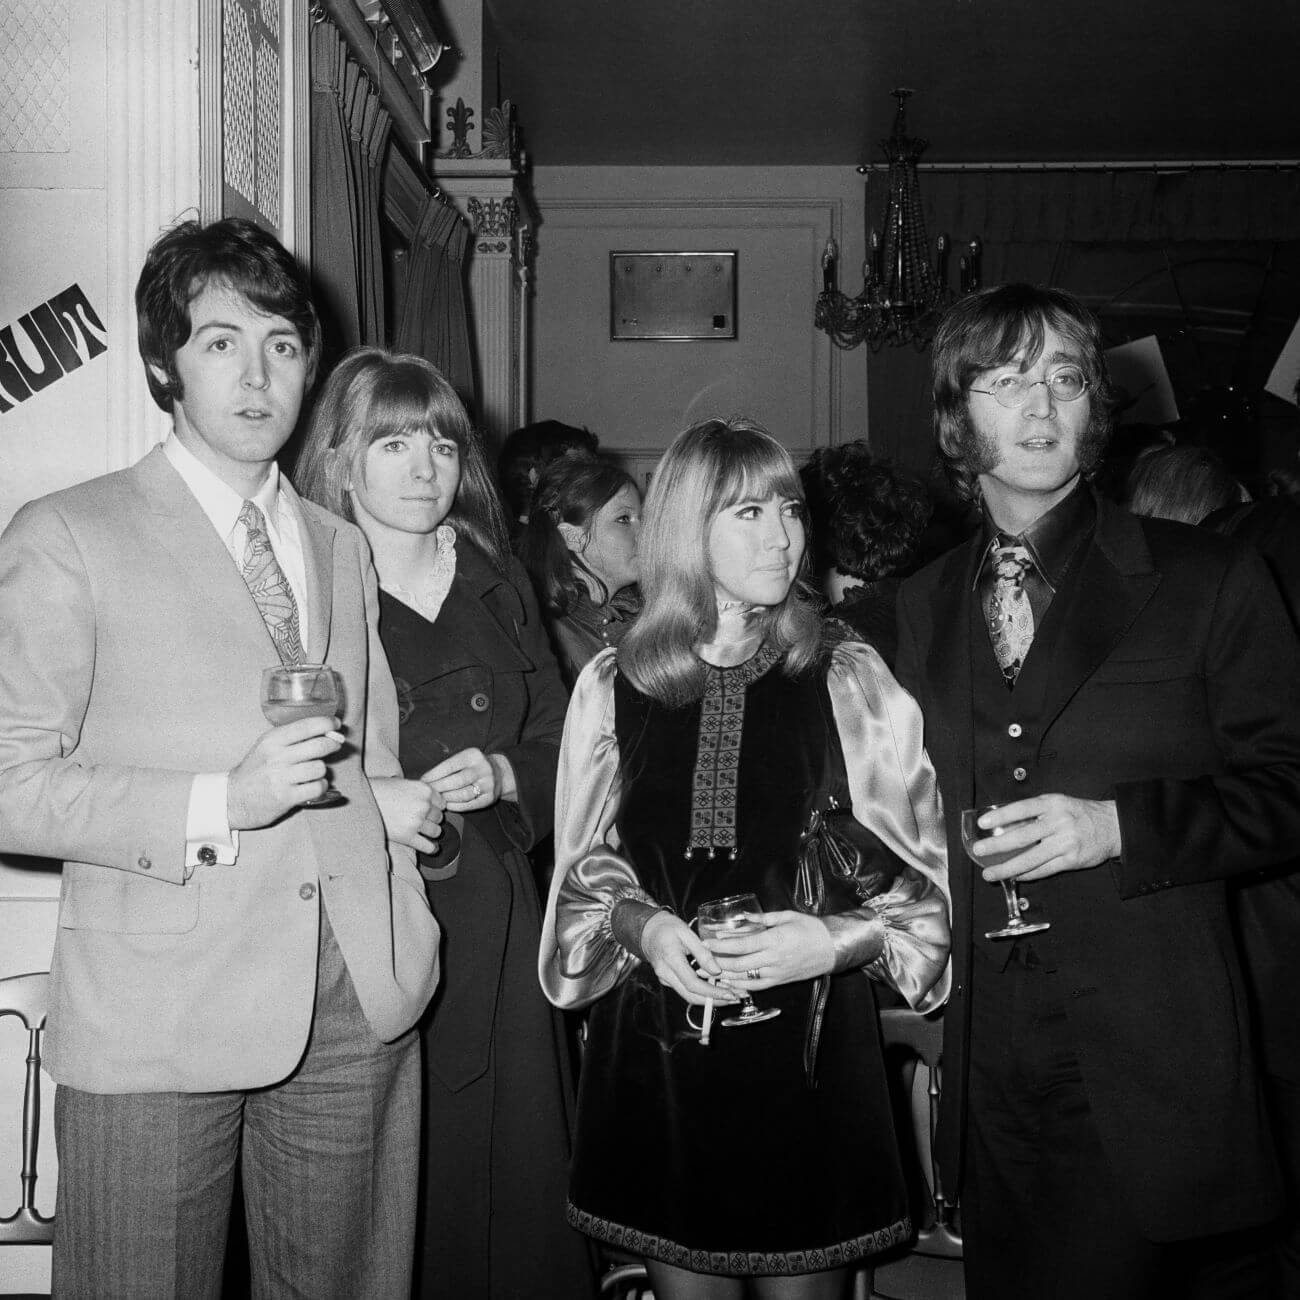 A black and white picture of Paul McCartney, Jane Asher, Cynthia Lennon, and John Lennon holding glasses and standing in a crowded room.